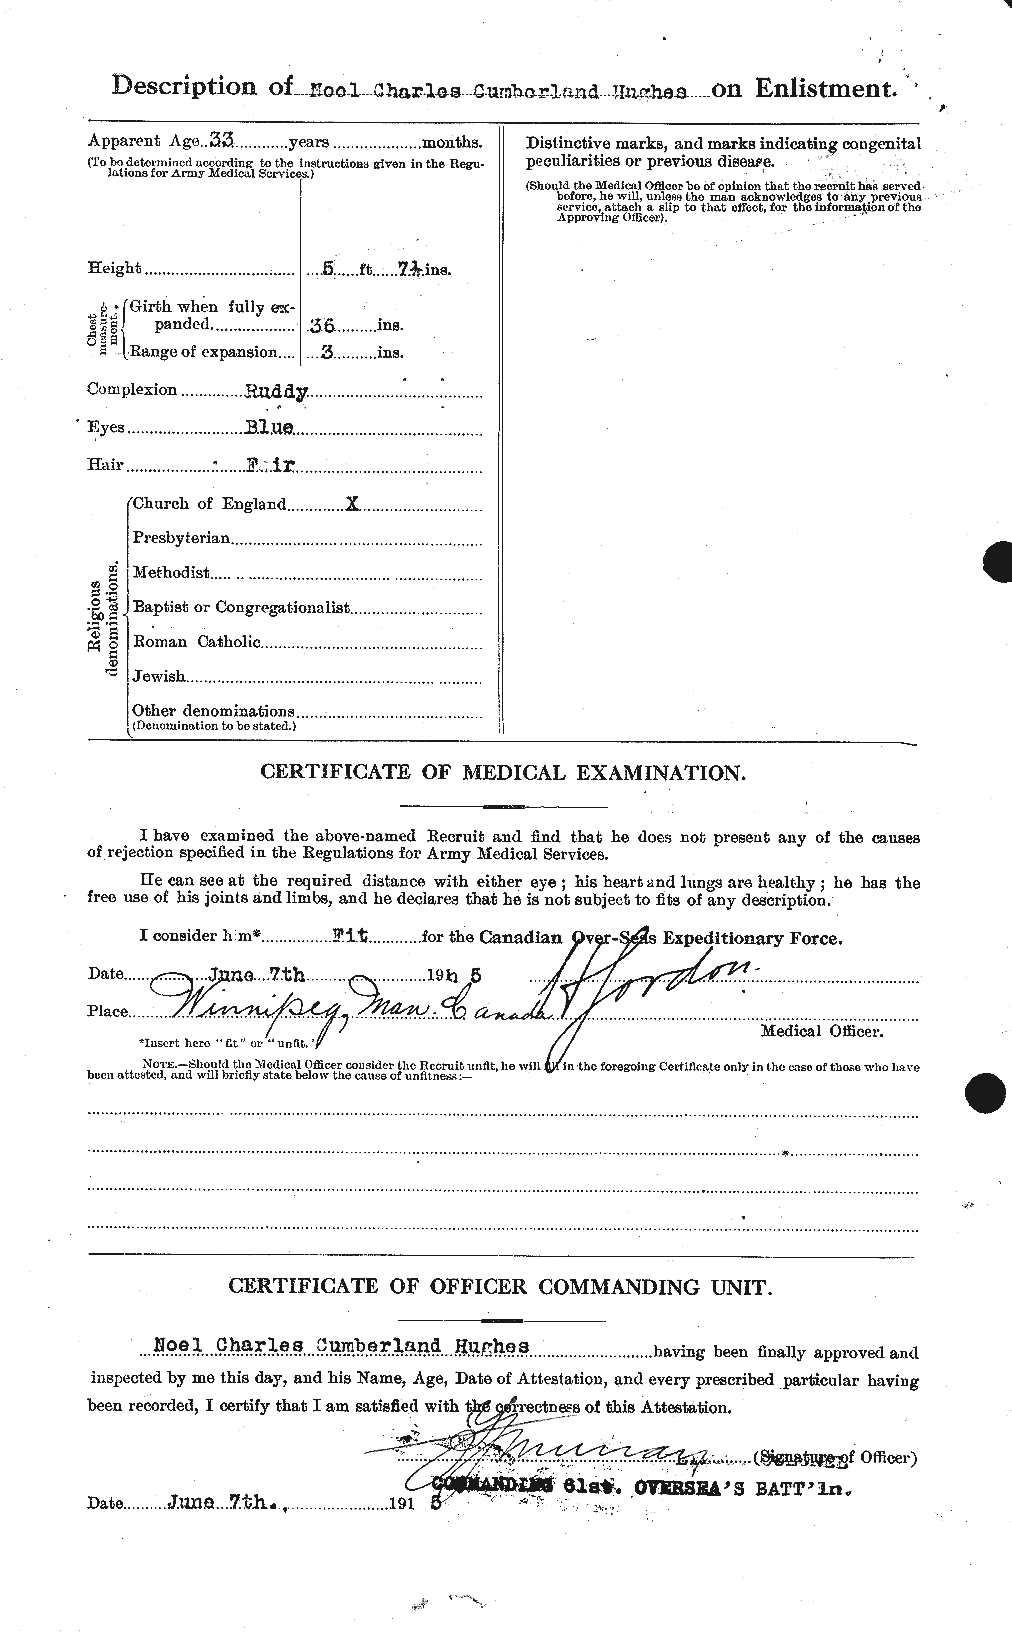 Personnel Records of the First World War - CEF 404129b